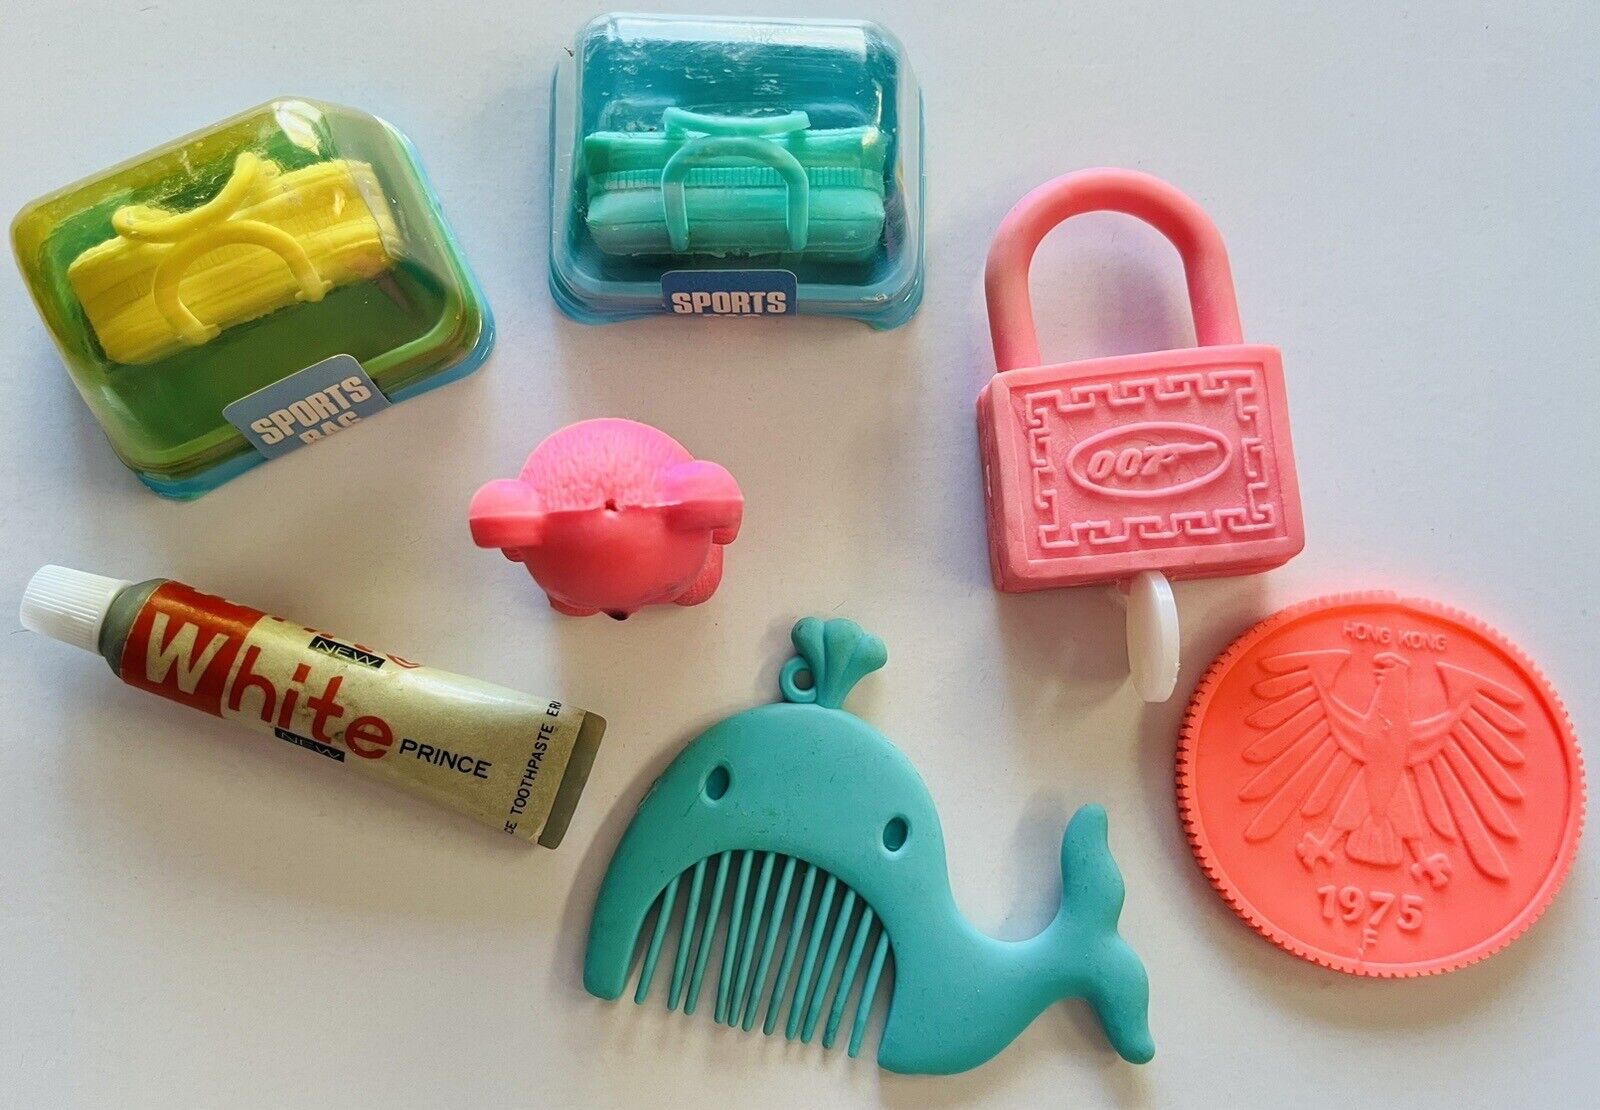 Collectable Vintage 80s Novelty Rubber Erasers 1980 Holidays Travel Themed